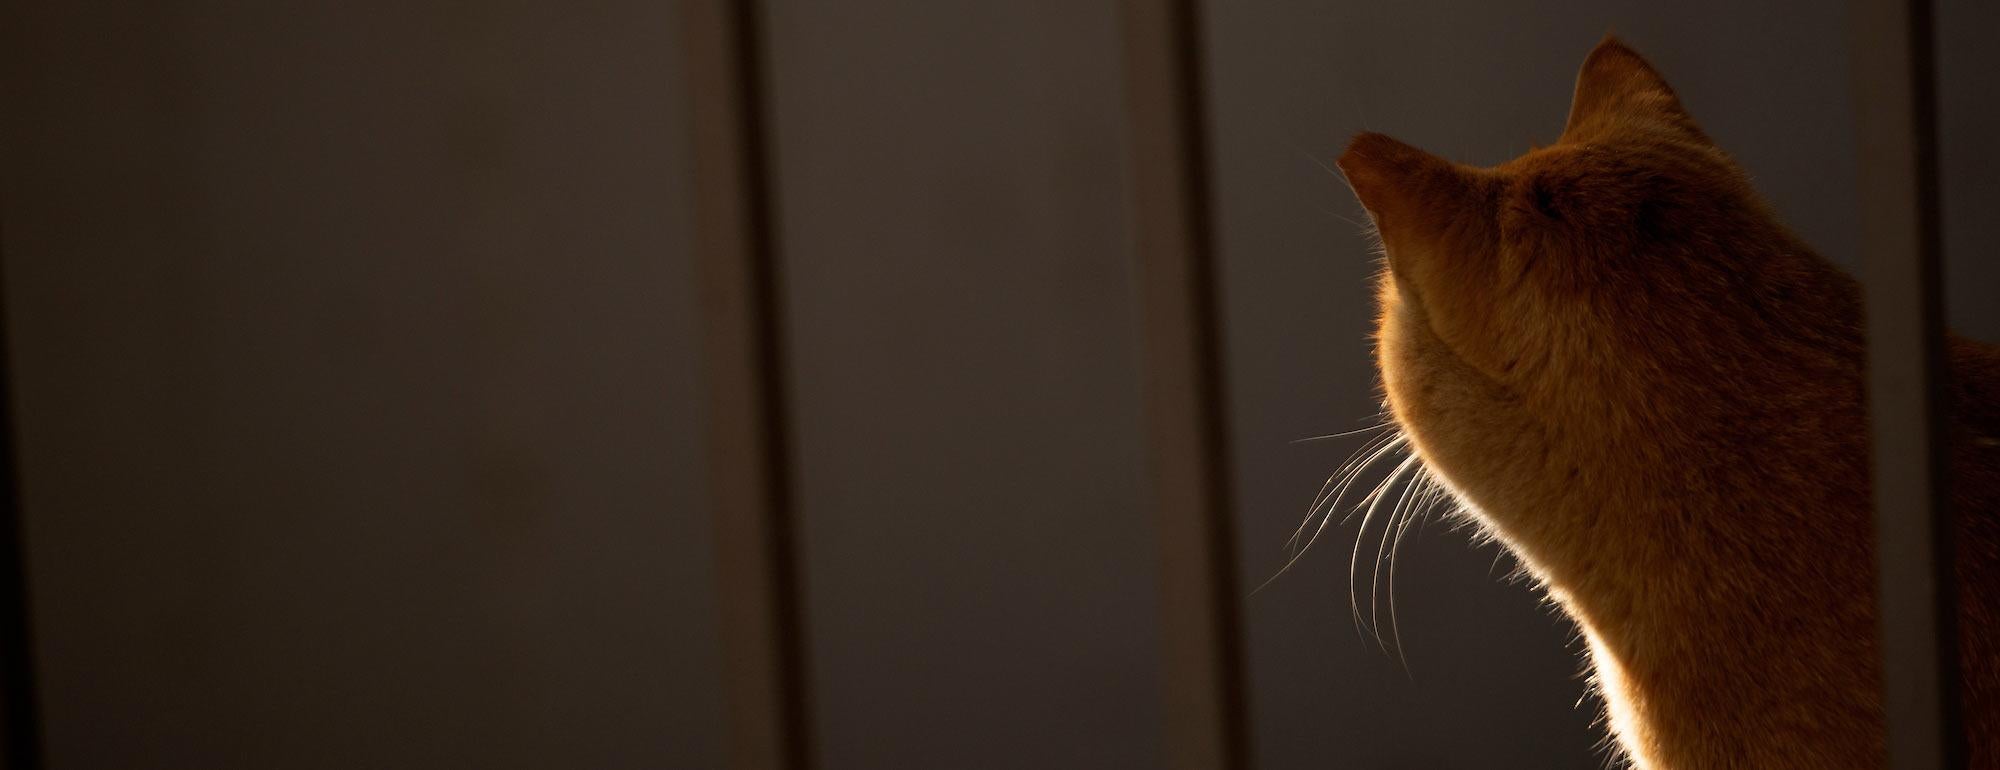 A view of a cat from the side with its fur catching the light